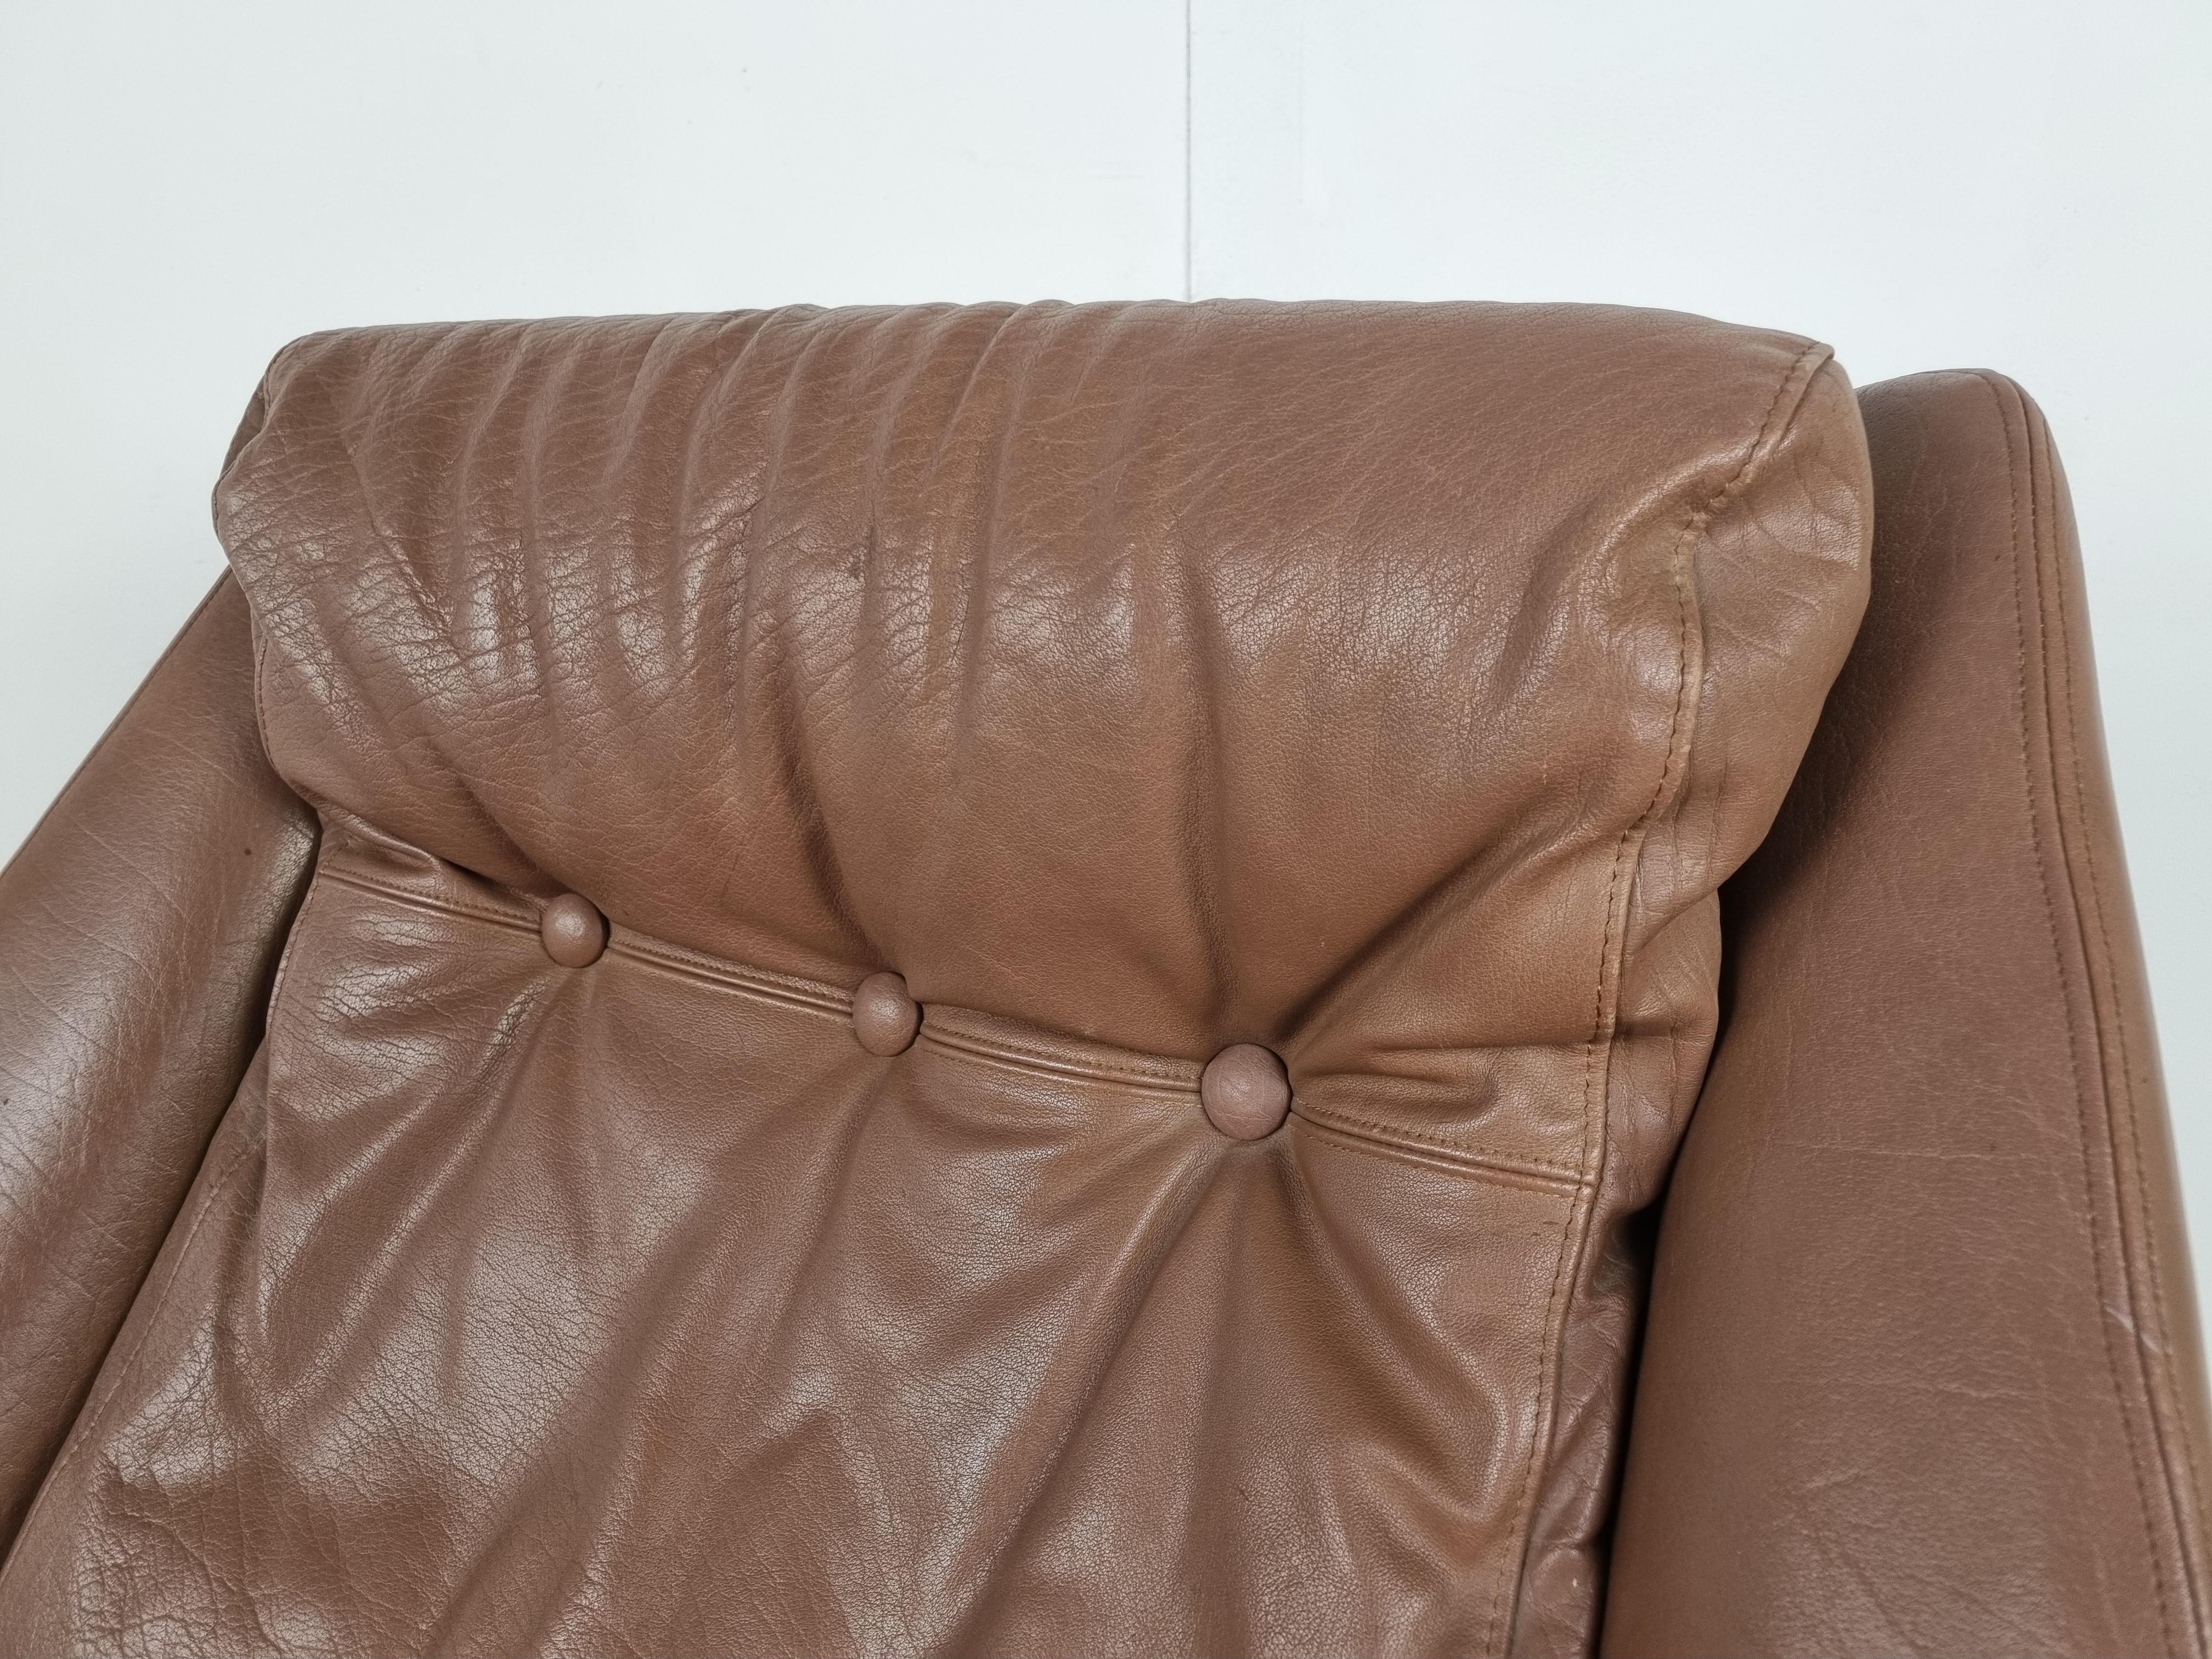 Mid century modern brown leather swivel chair.

Very comfortable swivel armchair with thick leather cushions.

Good seating position.

Very good condition.

Start shaped metal base with wooden look

The chair is very much in the style of